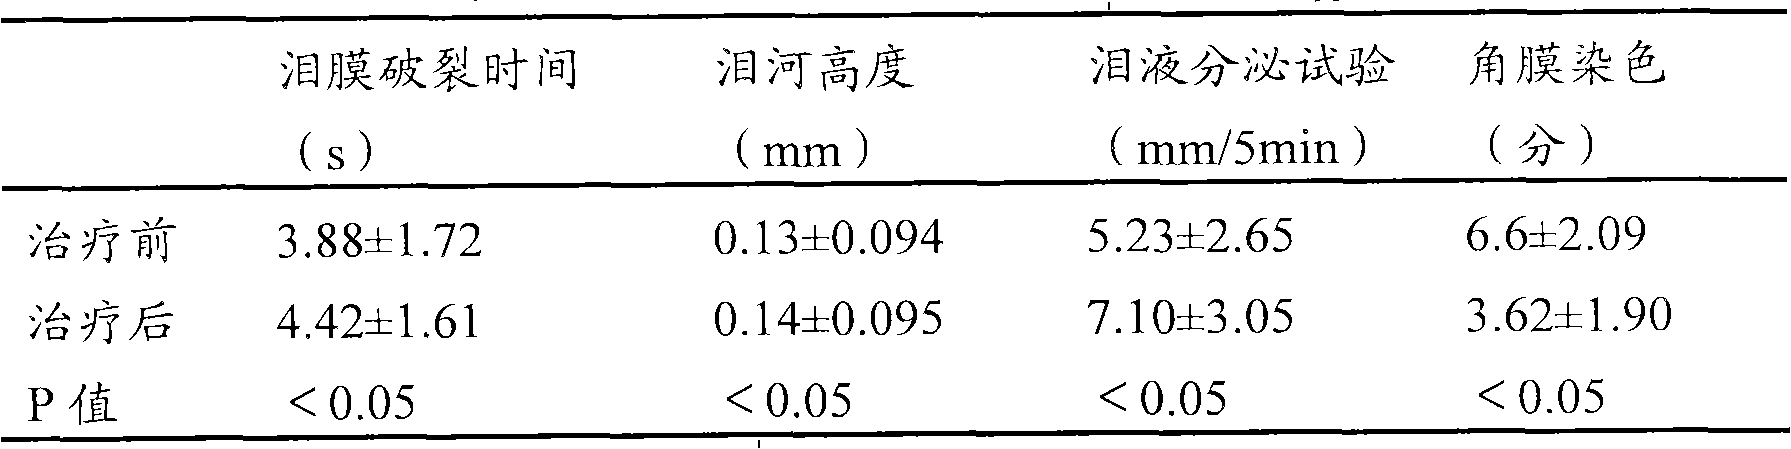 External traditional Chinese medicine composition for treating xerophthalmia and preparation method thereof